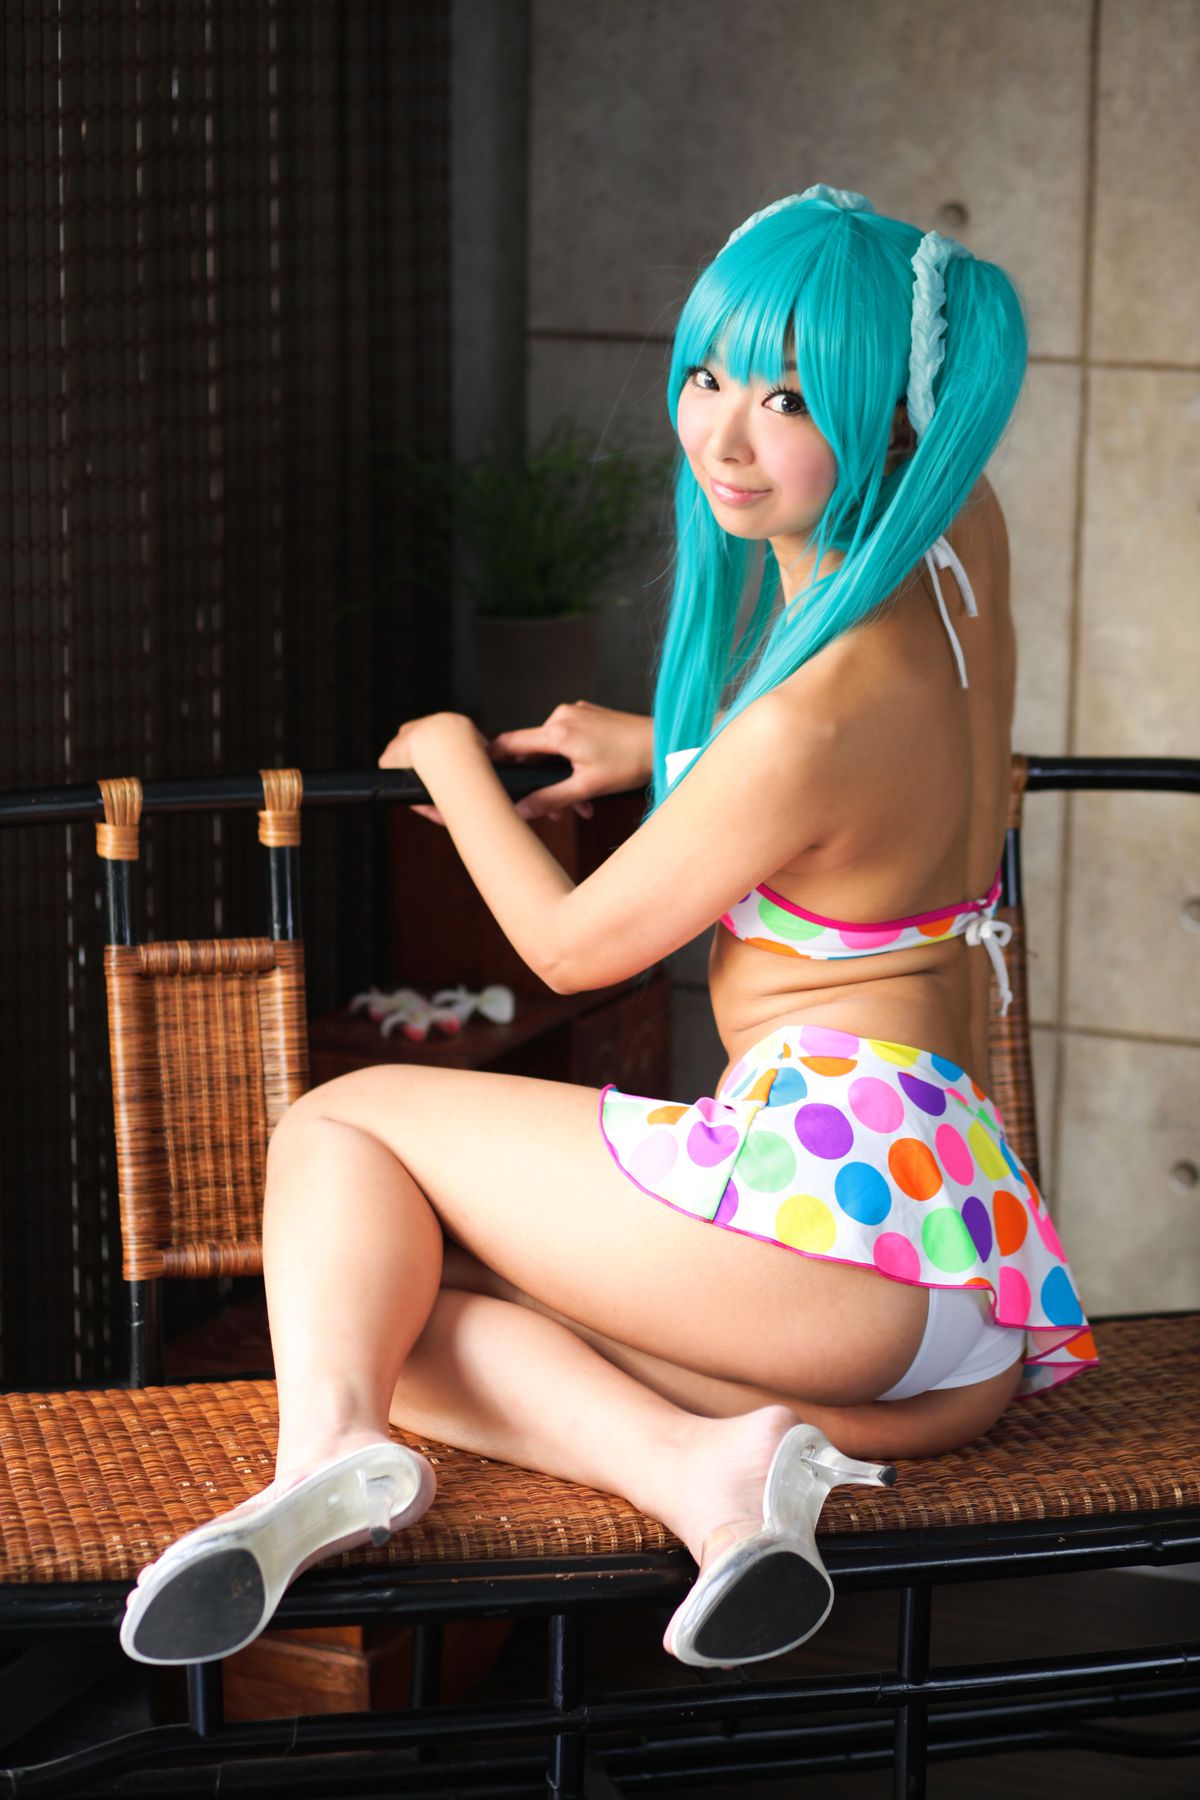 taotuhome[Cosplay] Necoco as Hatsune Miku from Vocaloid 套图第17张